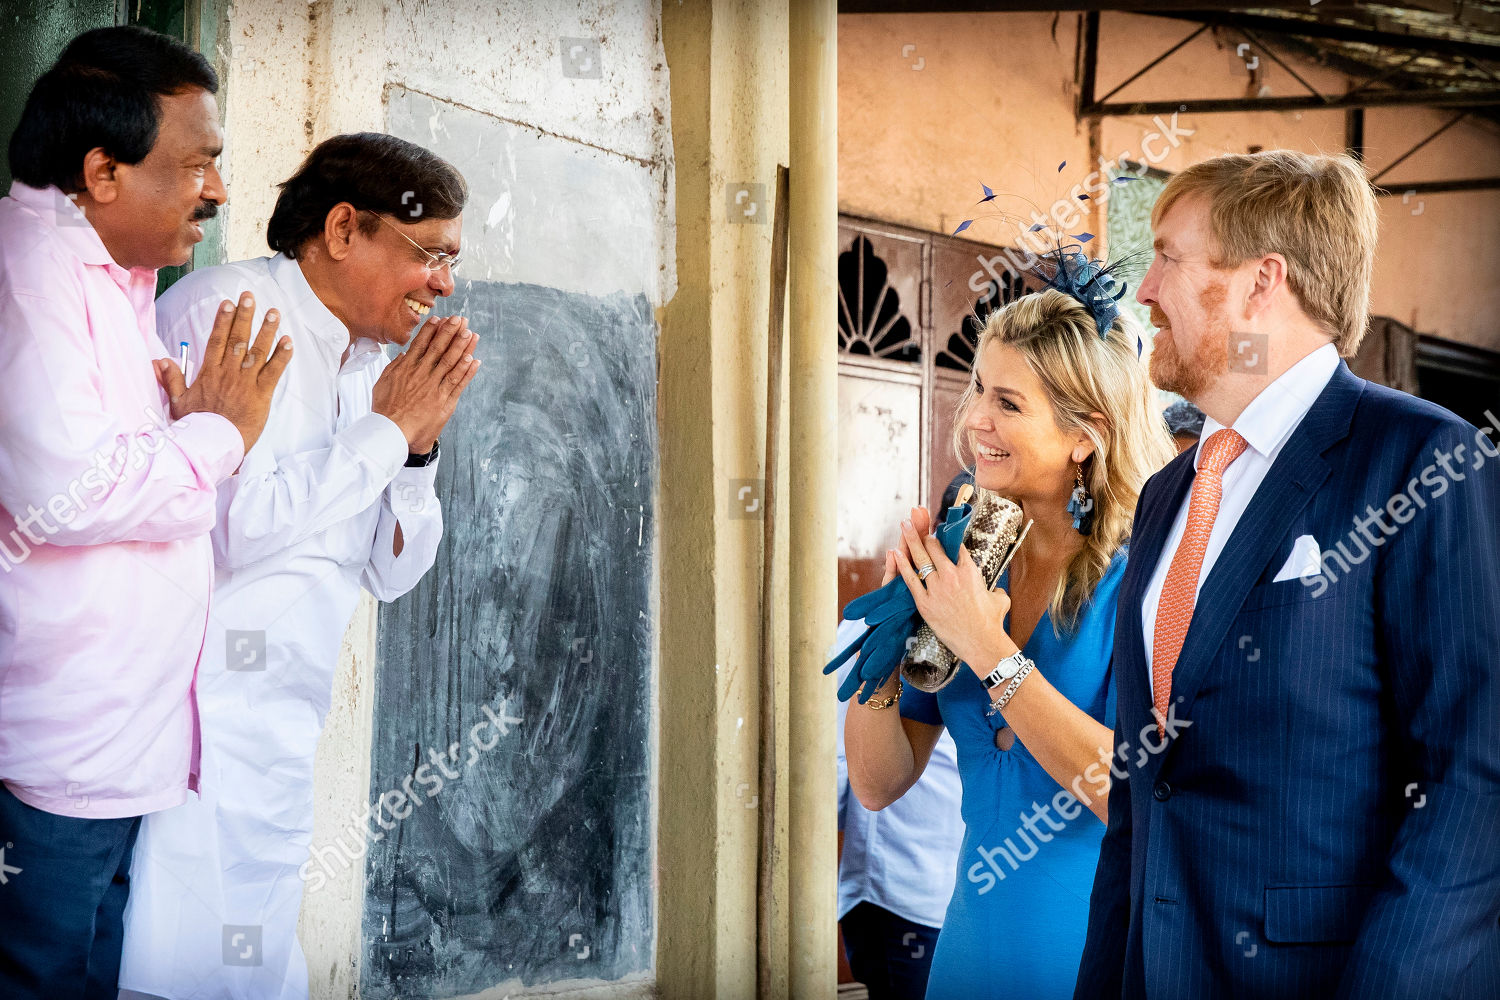 dutch-royals-state-visit-to-india-shutterstock-editorial-10445564c.jpg